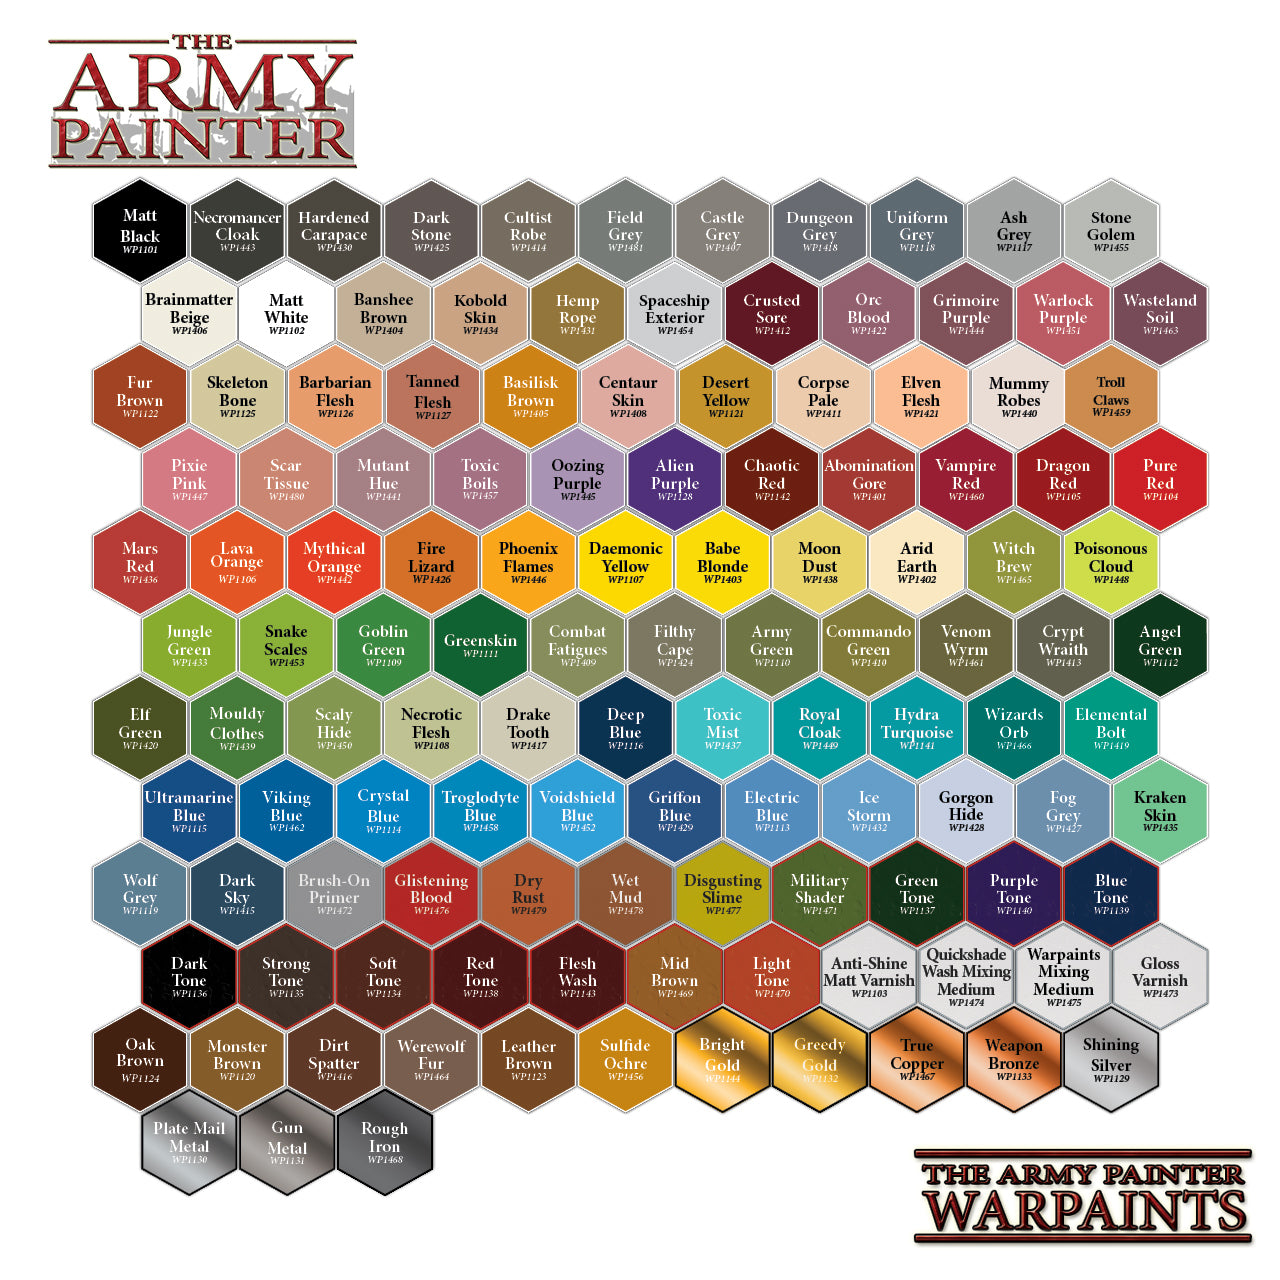 The Army painter - Warpaints Air Color Triad